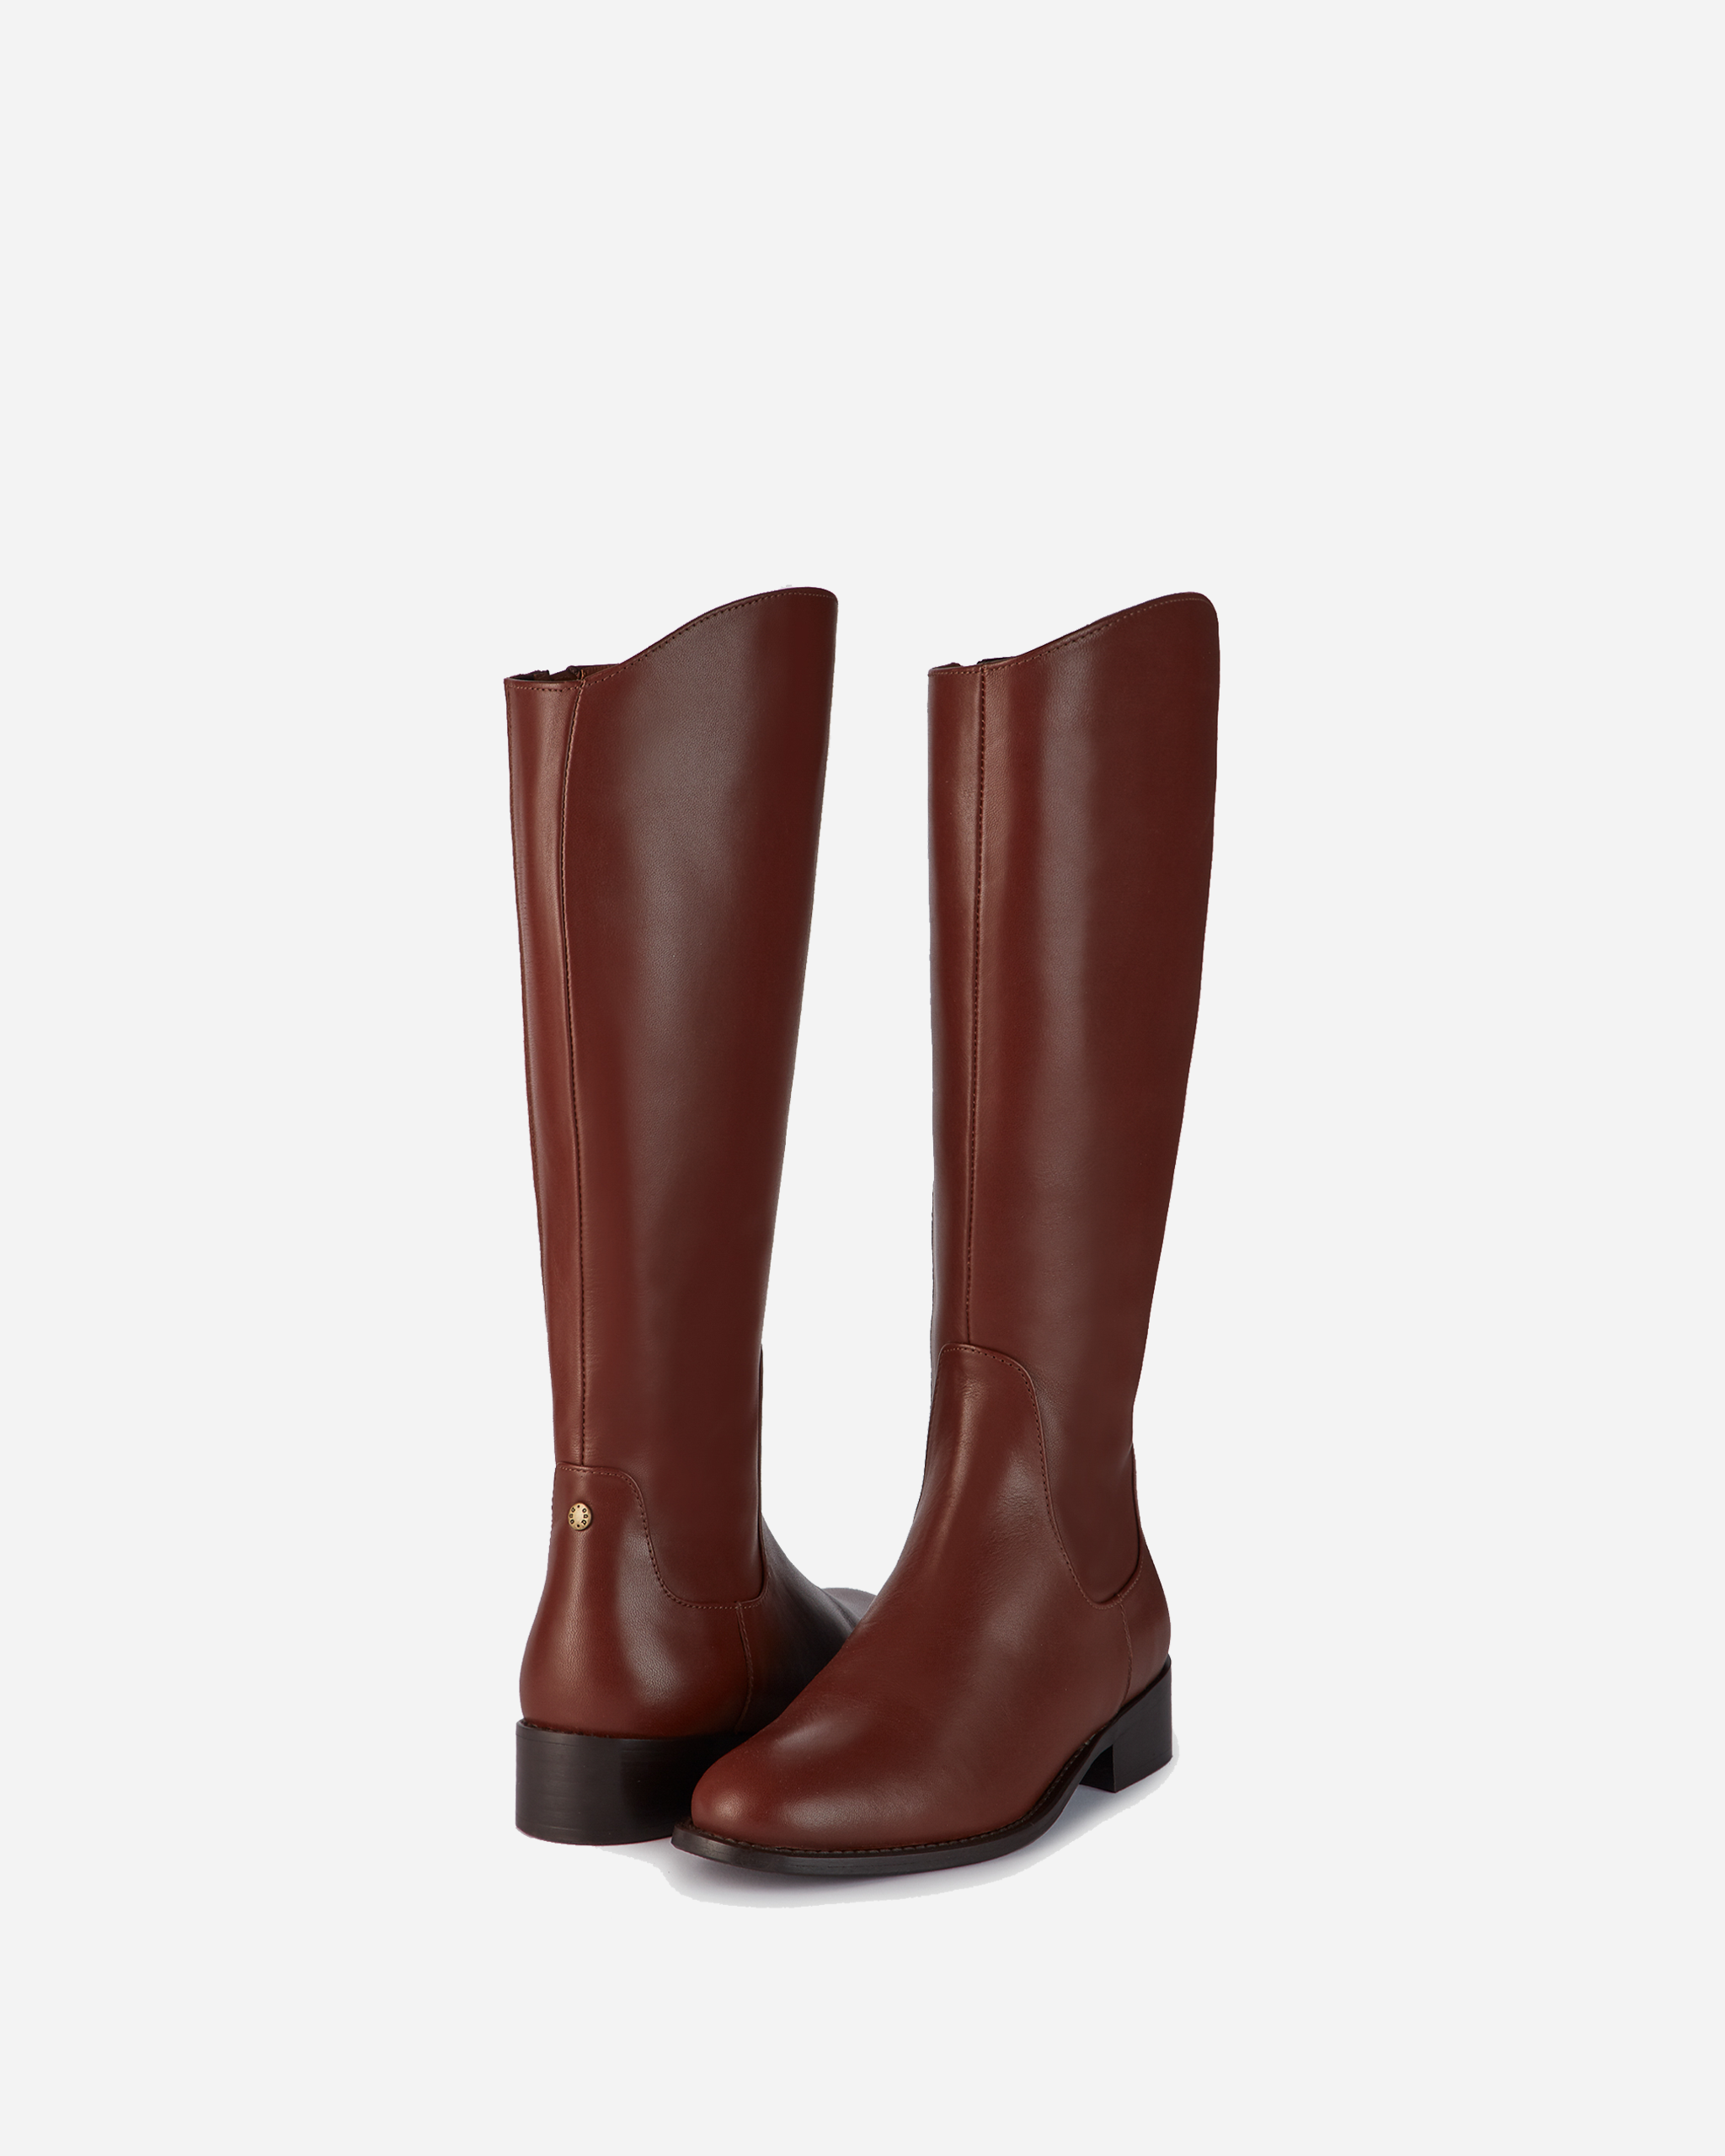 Burgundy knee high leather boots